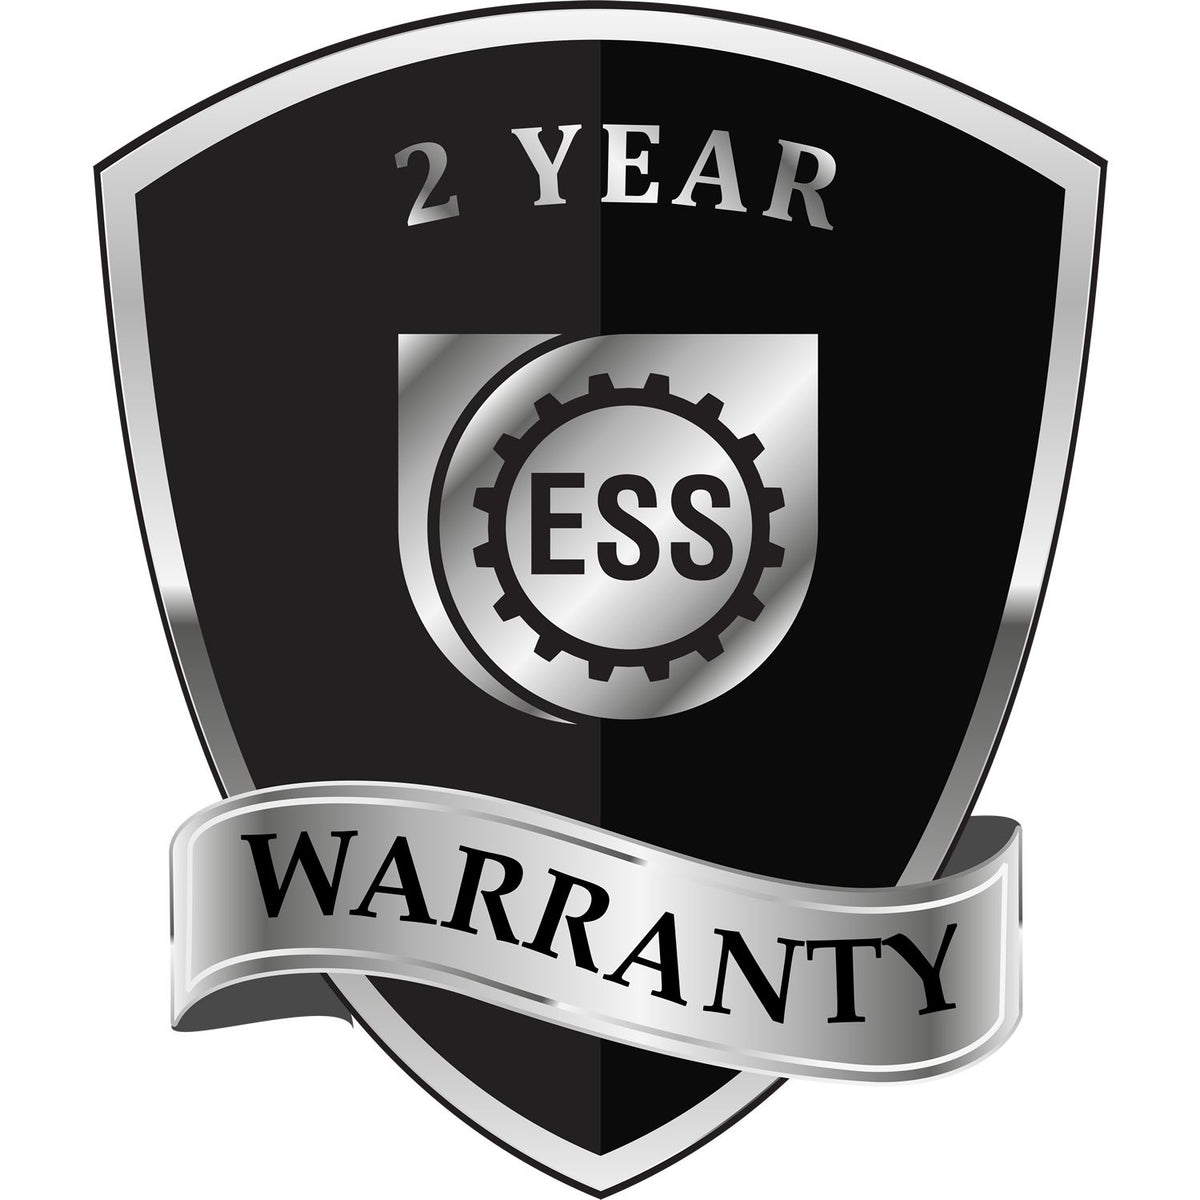 A black and silver badge or emblem showing warranty information for the Hybrid West Virginia Geologist Seal